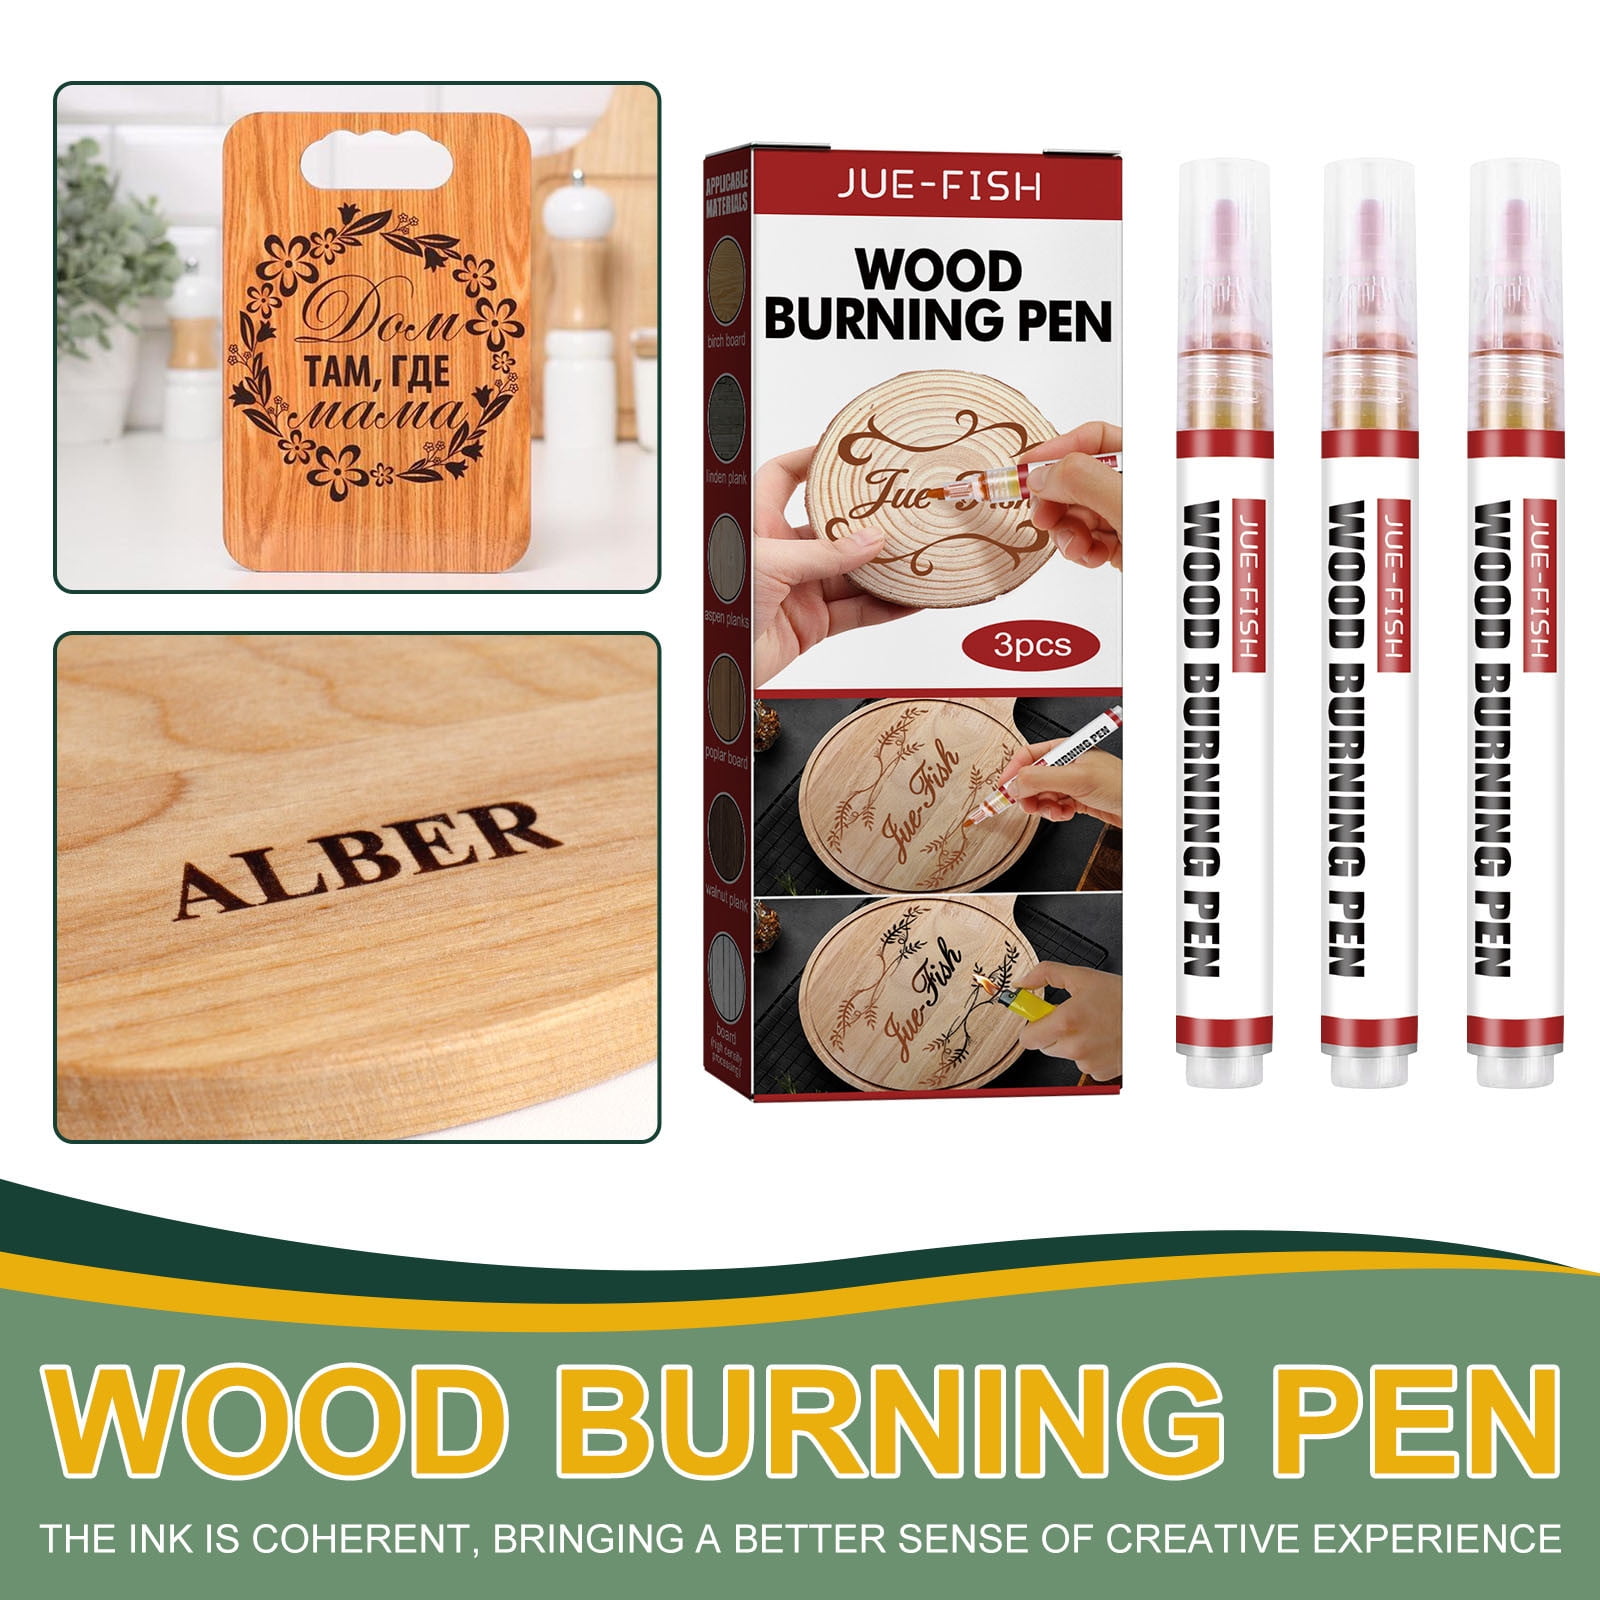 SUIUBUY Scorch Pen Marker - 2 PCS Wood Burning Pen Tool with Replacement  Tip, Chemical Wood Burner Set for Burning Wood, Do-it-Yourself Kit for Arts